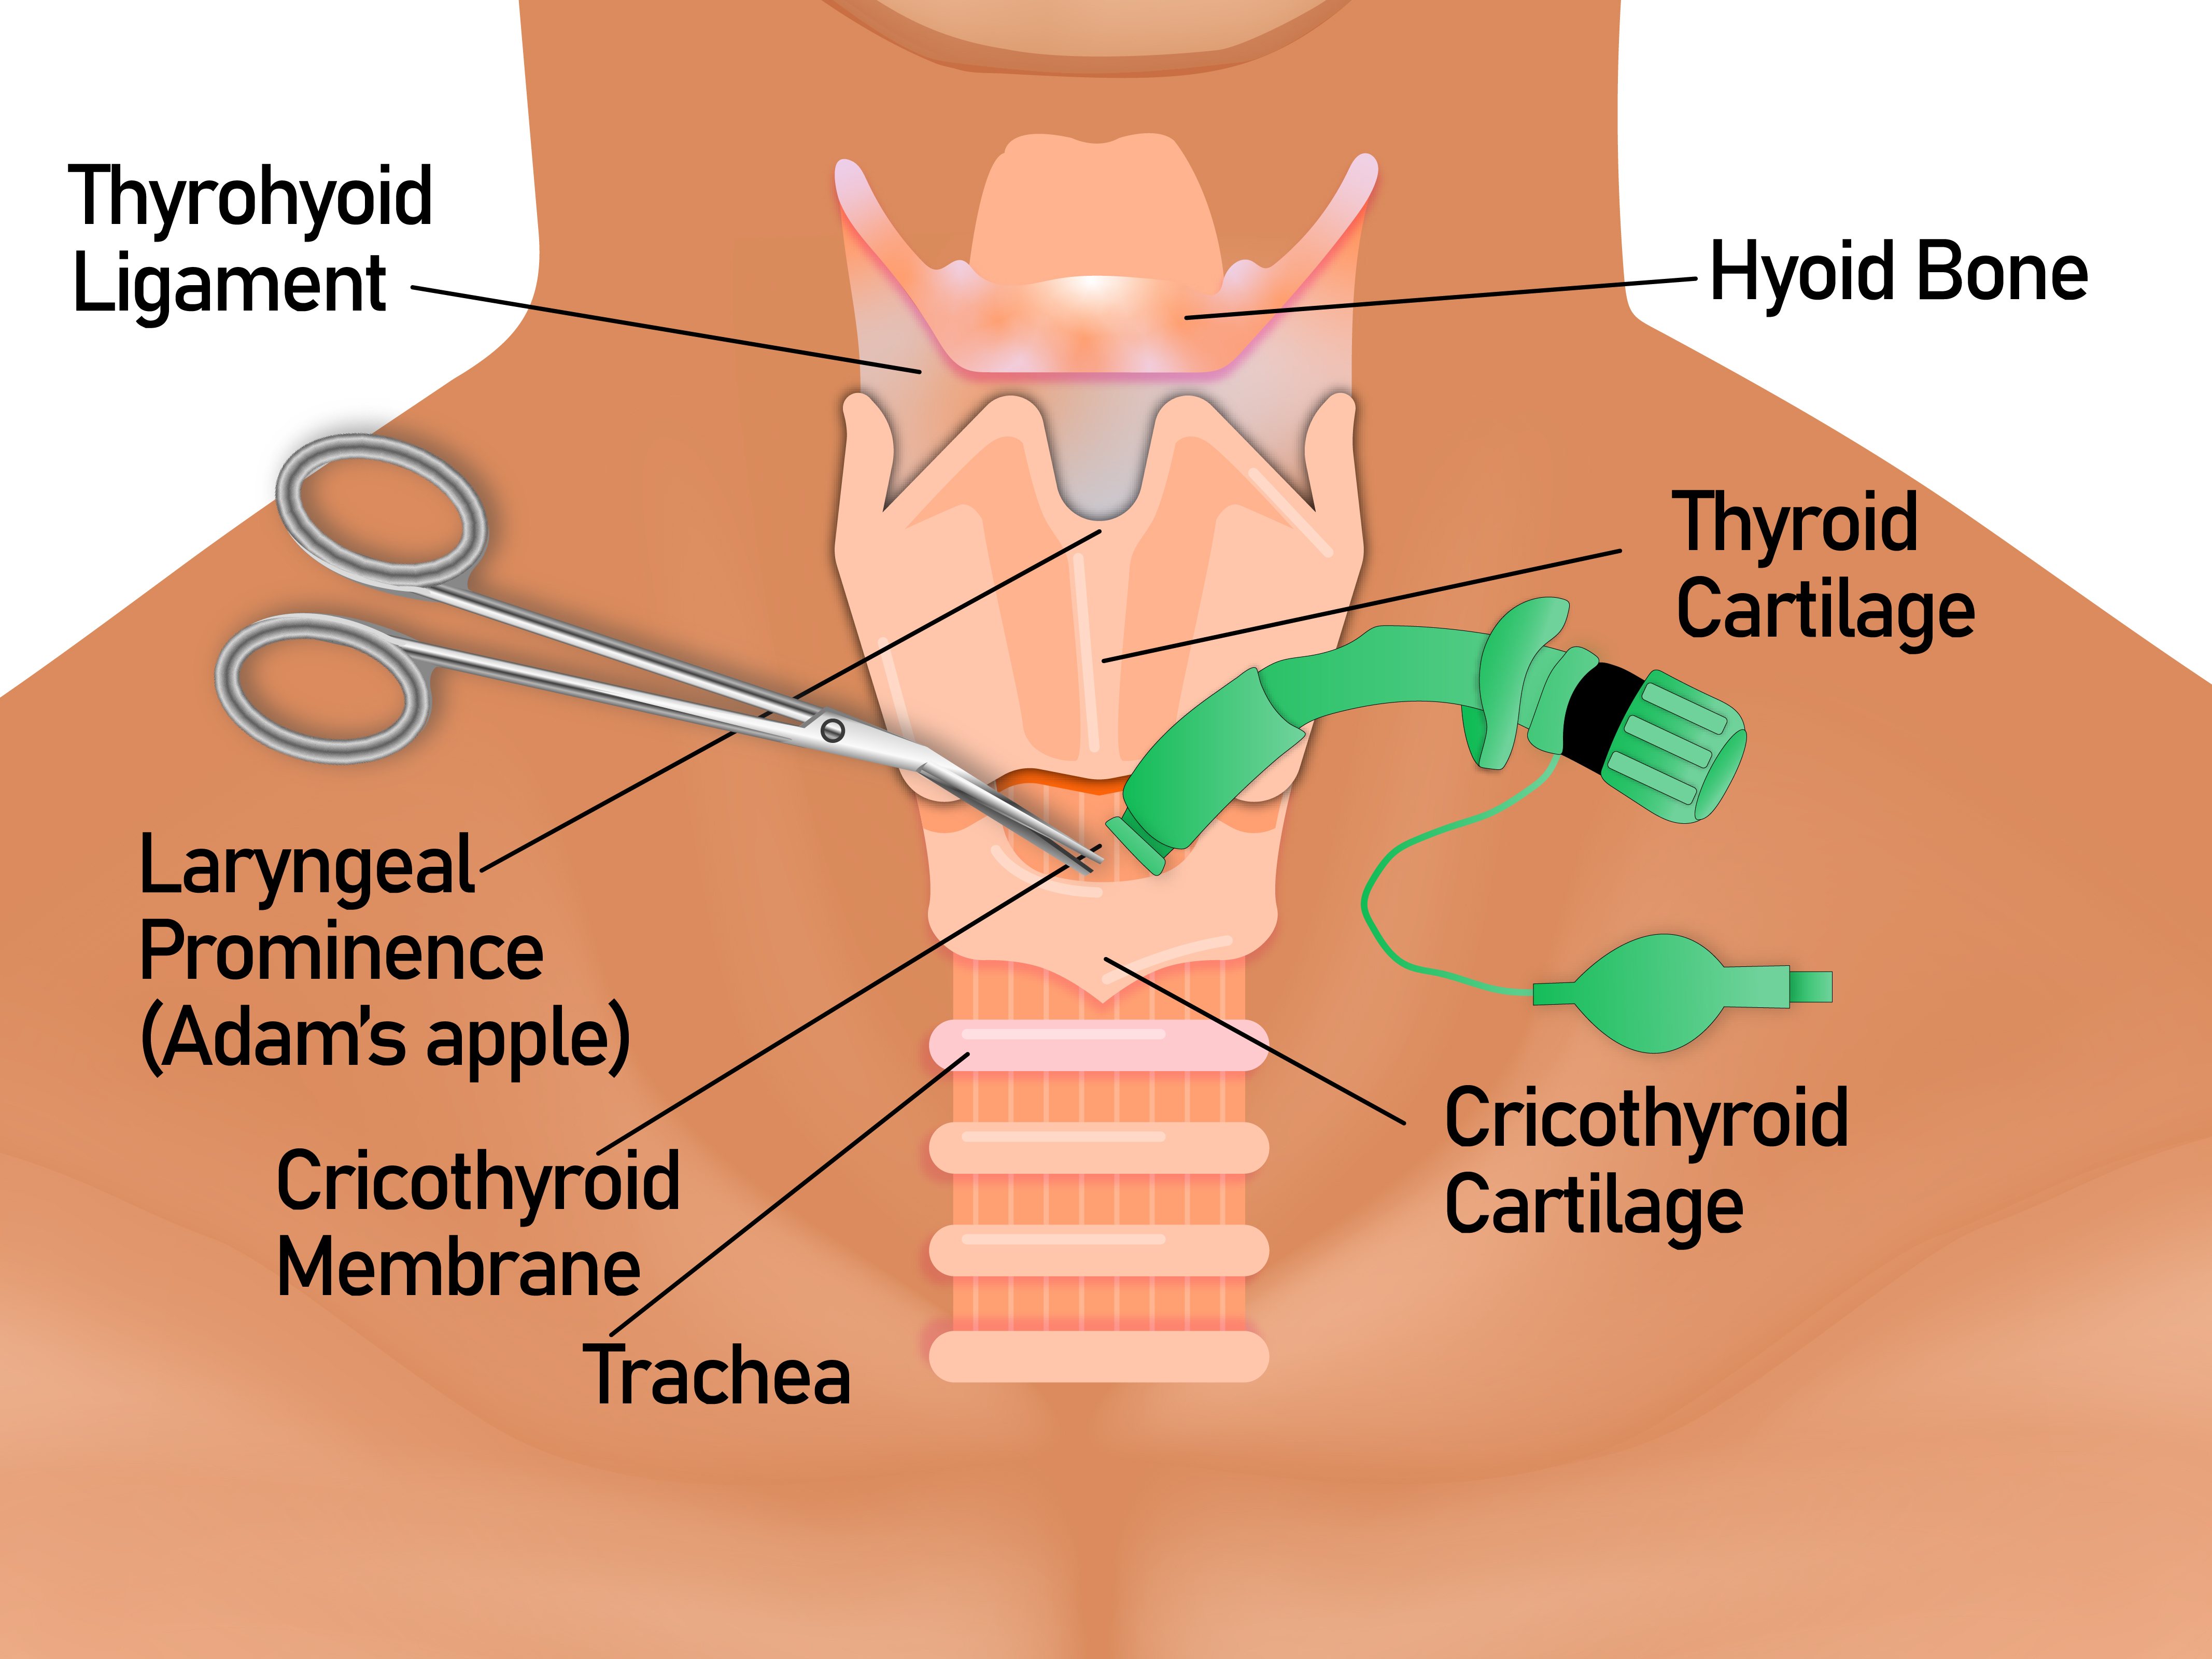 This image illustrates the anatomy and the framework of airway in the neck region